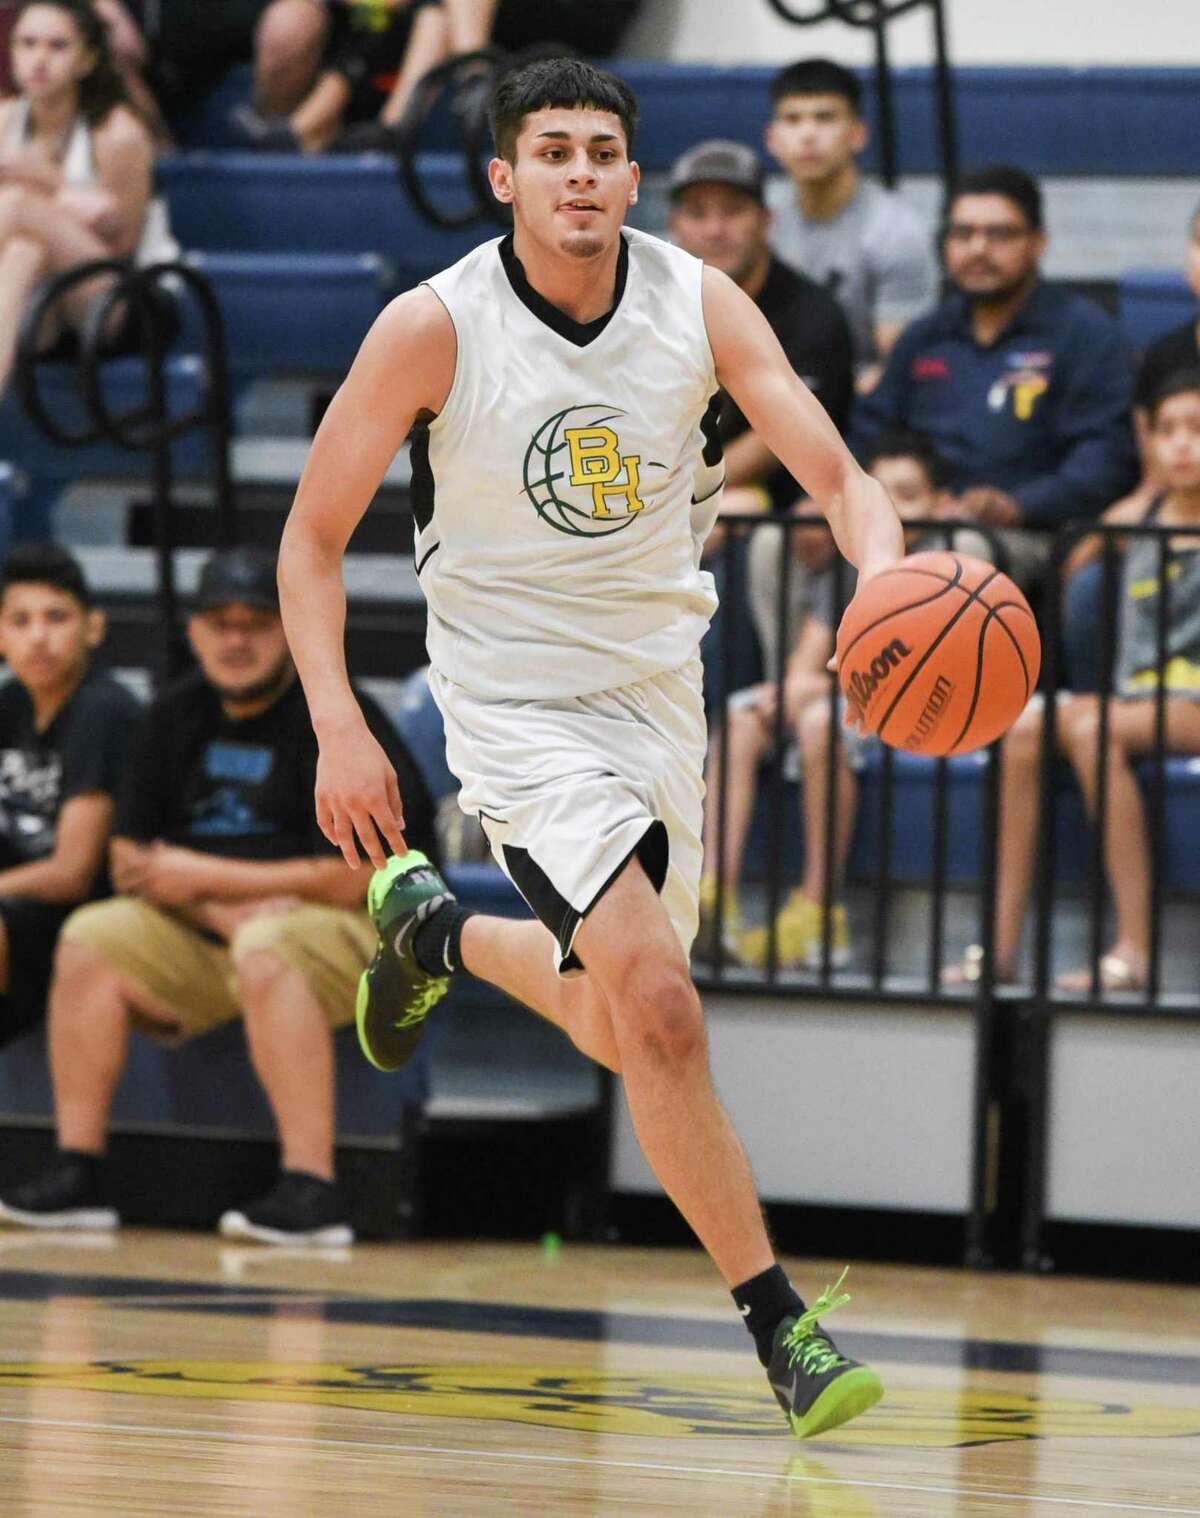 Nixon's Bryan Garcia averaged 7.7 points per game while shooting 41% from the field in his first season on varsity.